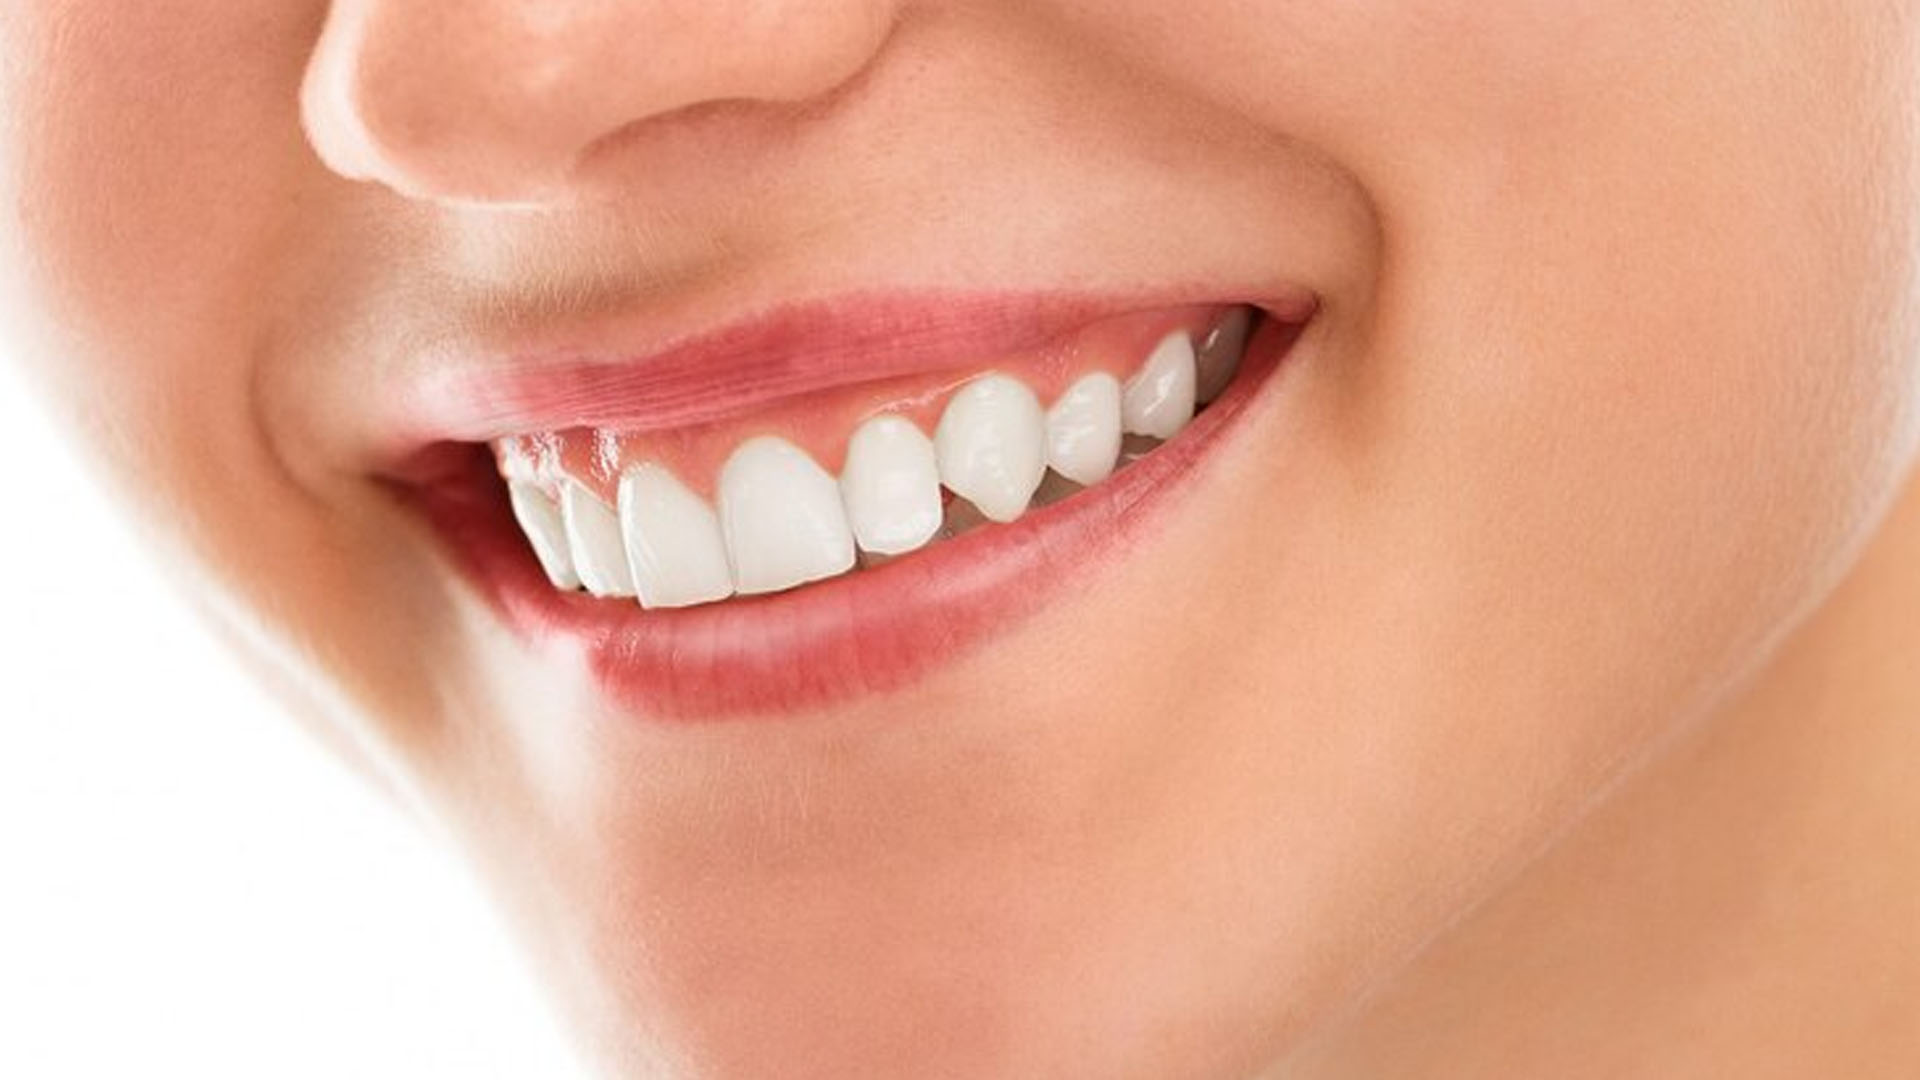 What are the Home Remedies for Teeth Whitening?